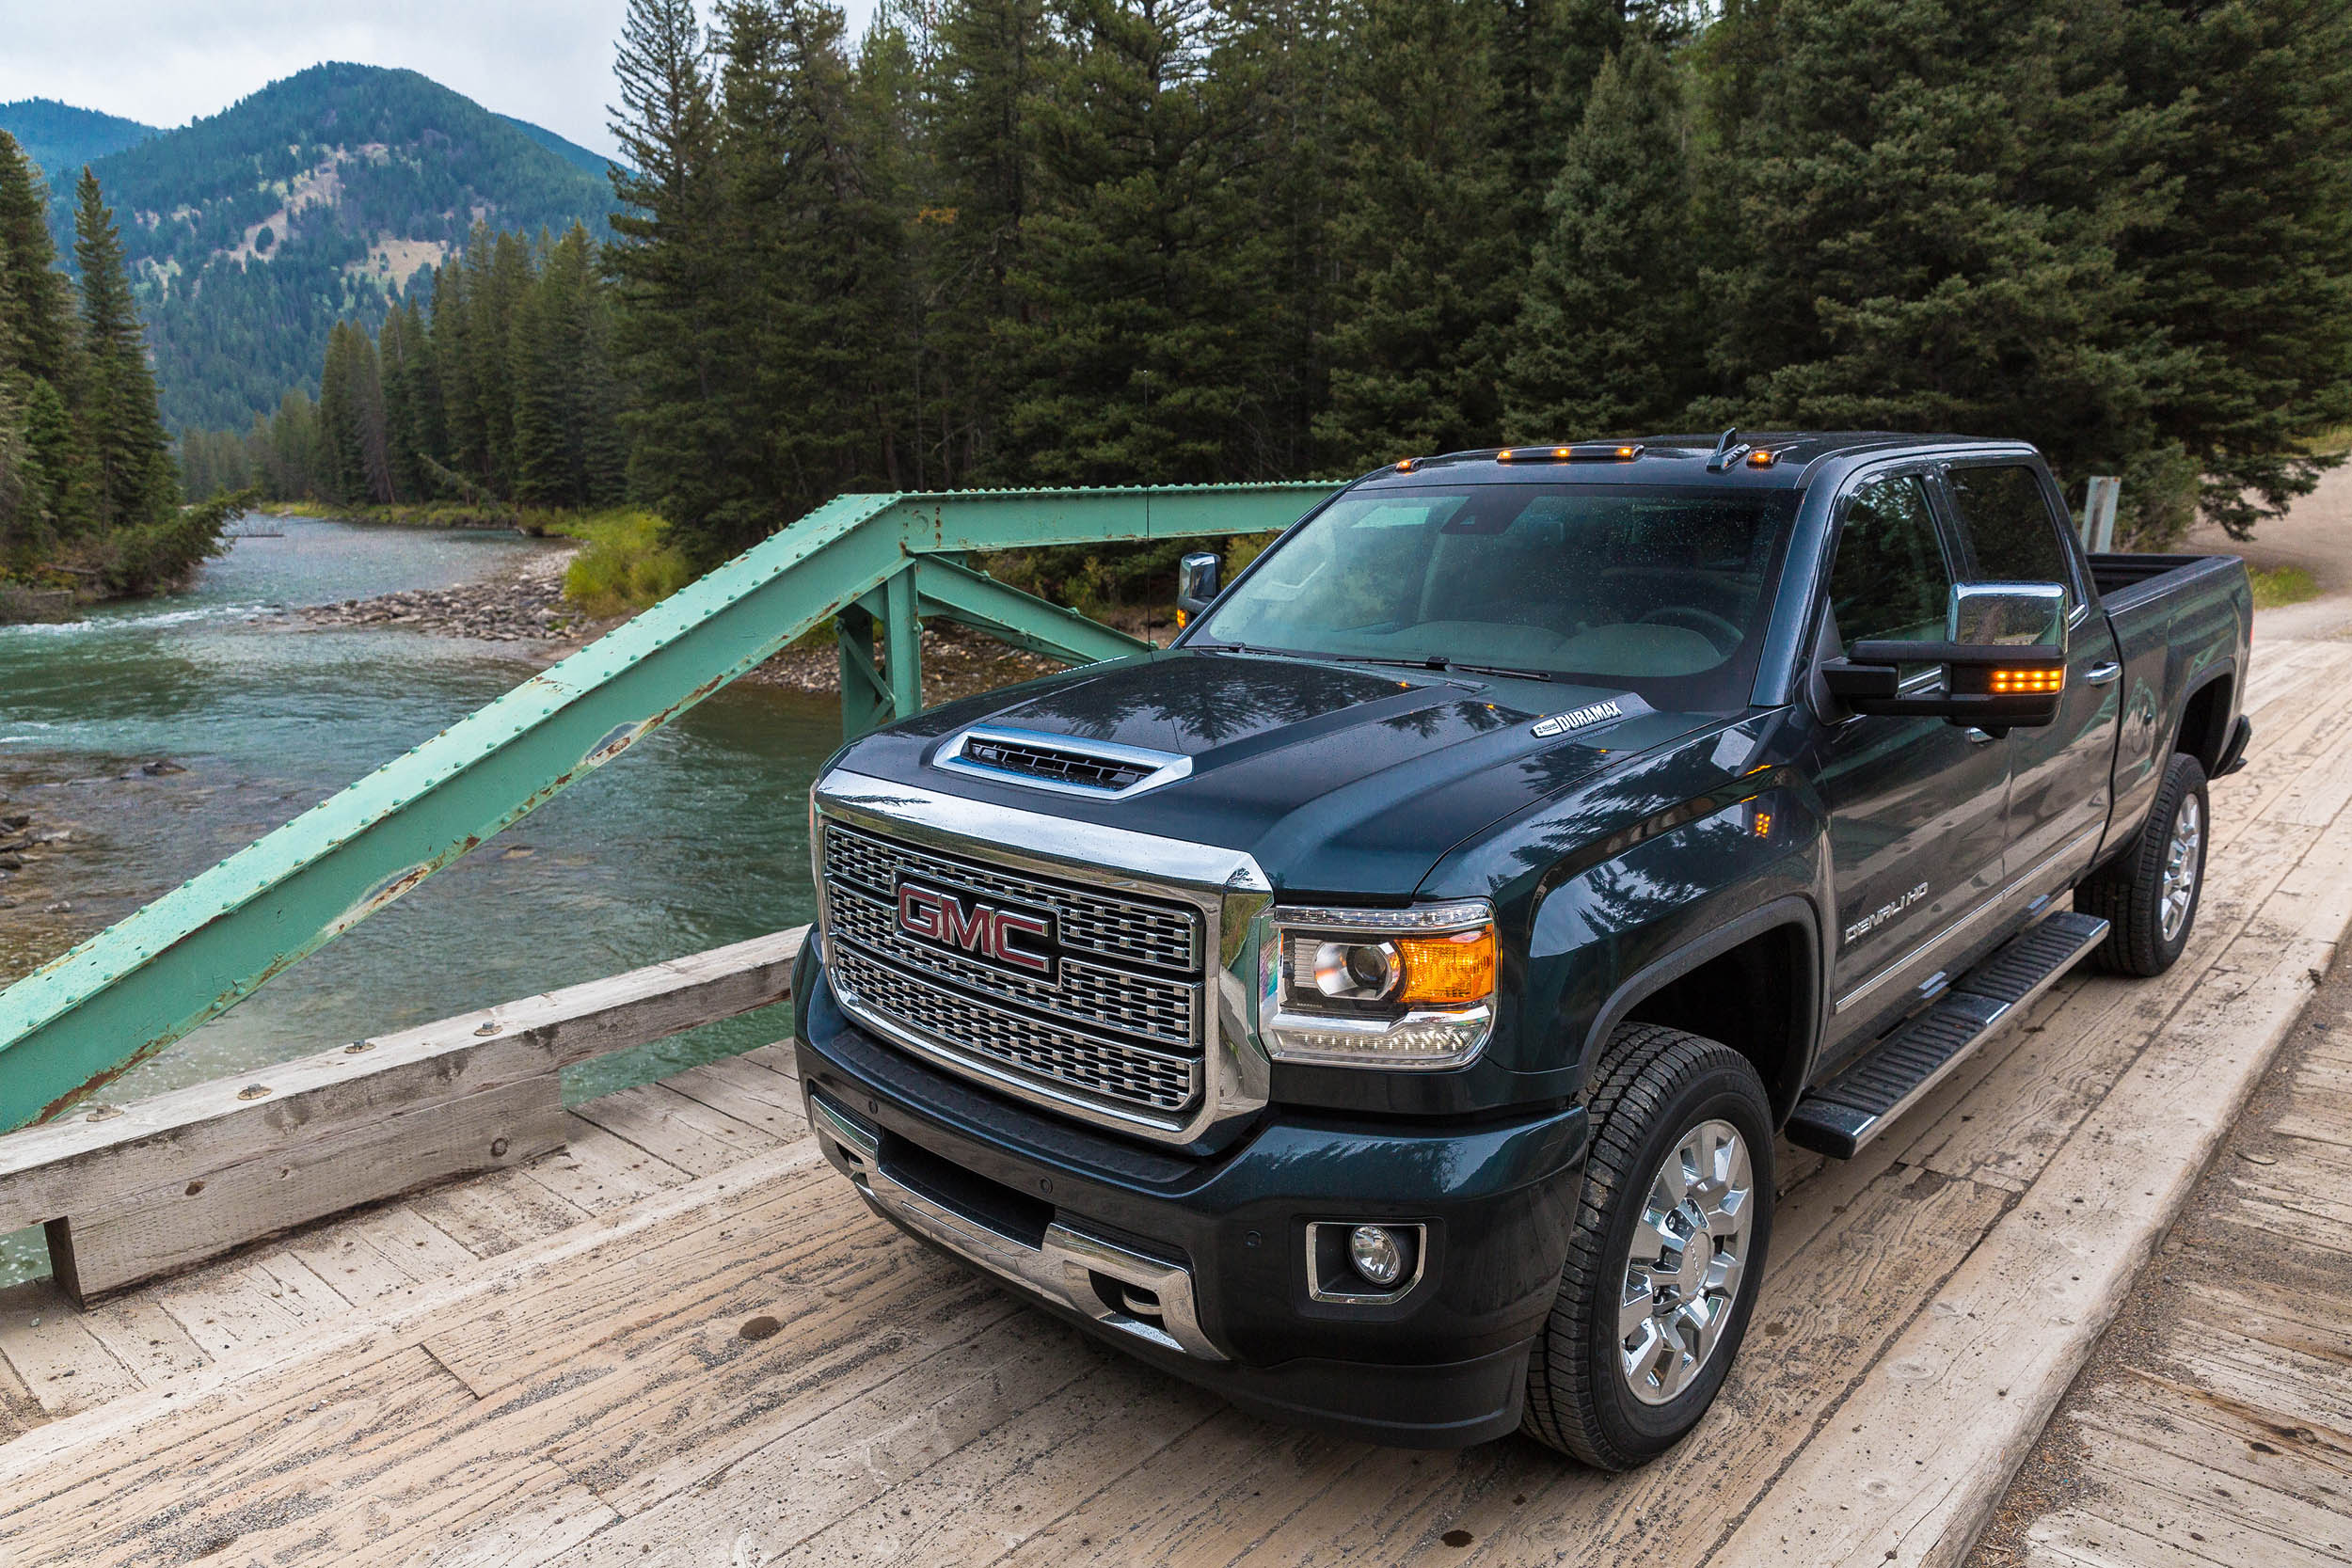 2019 Gmc Sierra 2500hd Review Ratings Specs Prices And